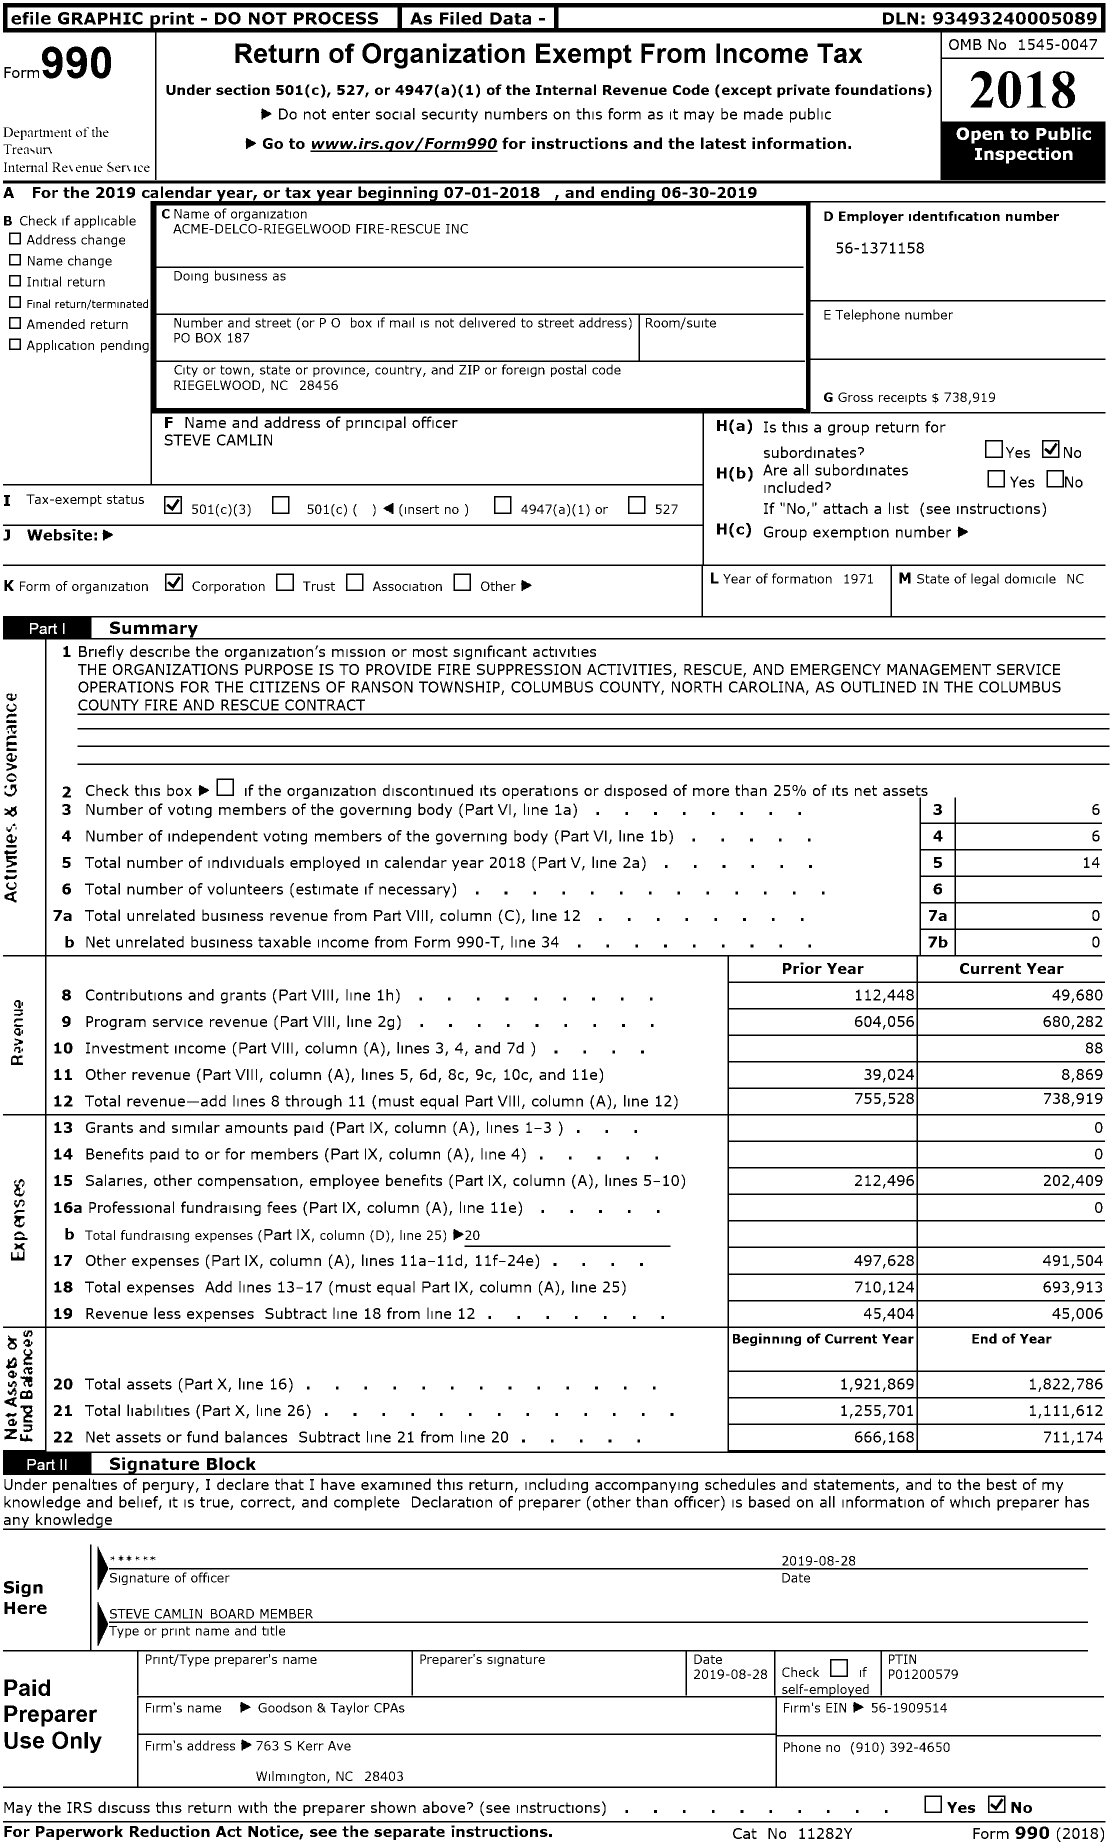 Image of first page of 2018 Form 990 for Acme-Delco-Riegelwood Fire-Rescue